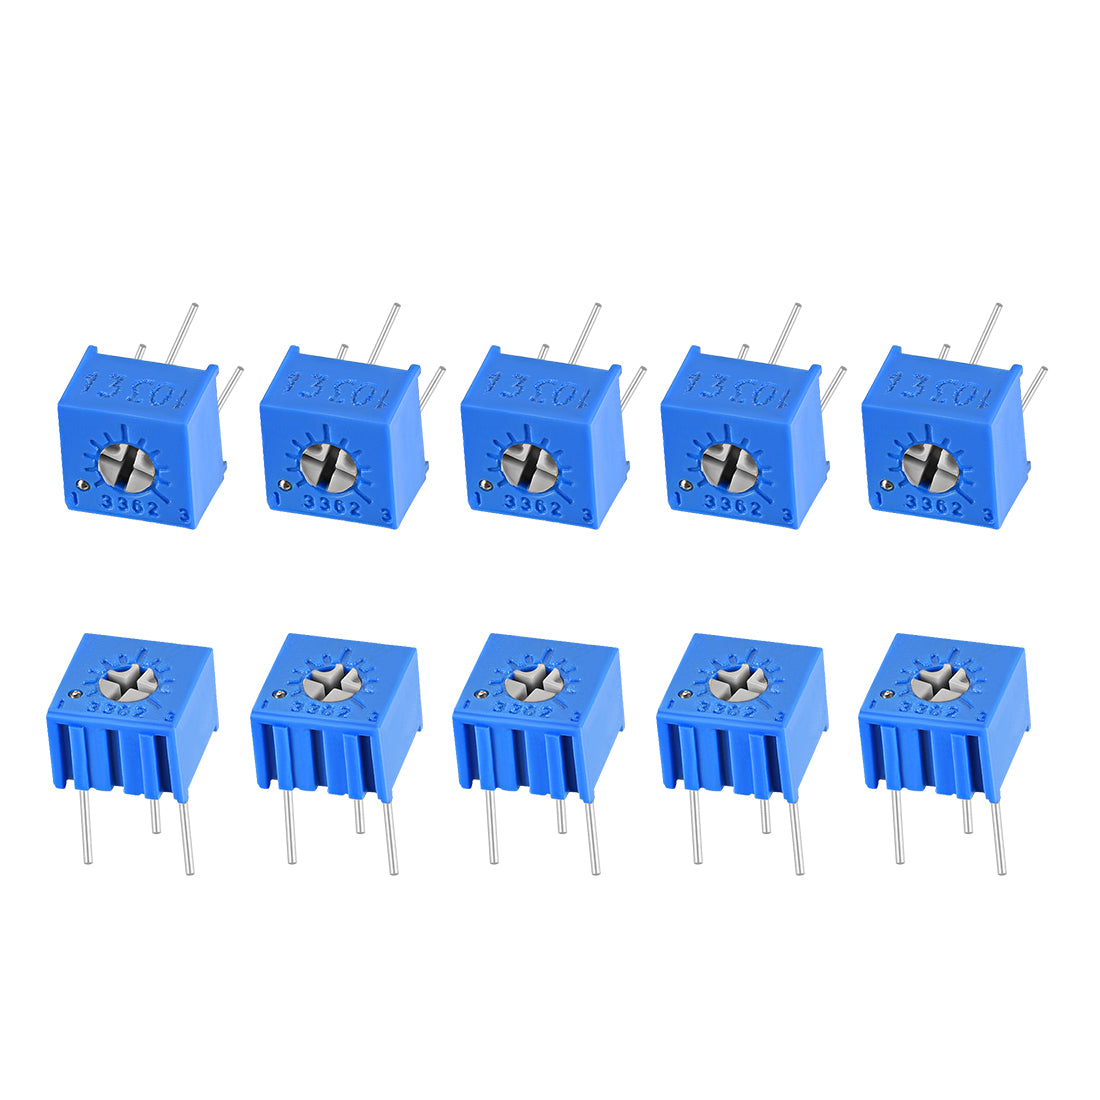 uxcell Uxcell 3362 Trimmer Potentiometer 10K Ohm Top Adjustment Horizontal Variable Resistors 10Pcs